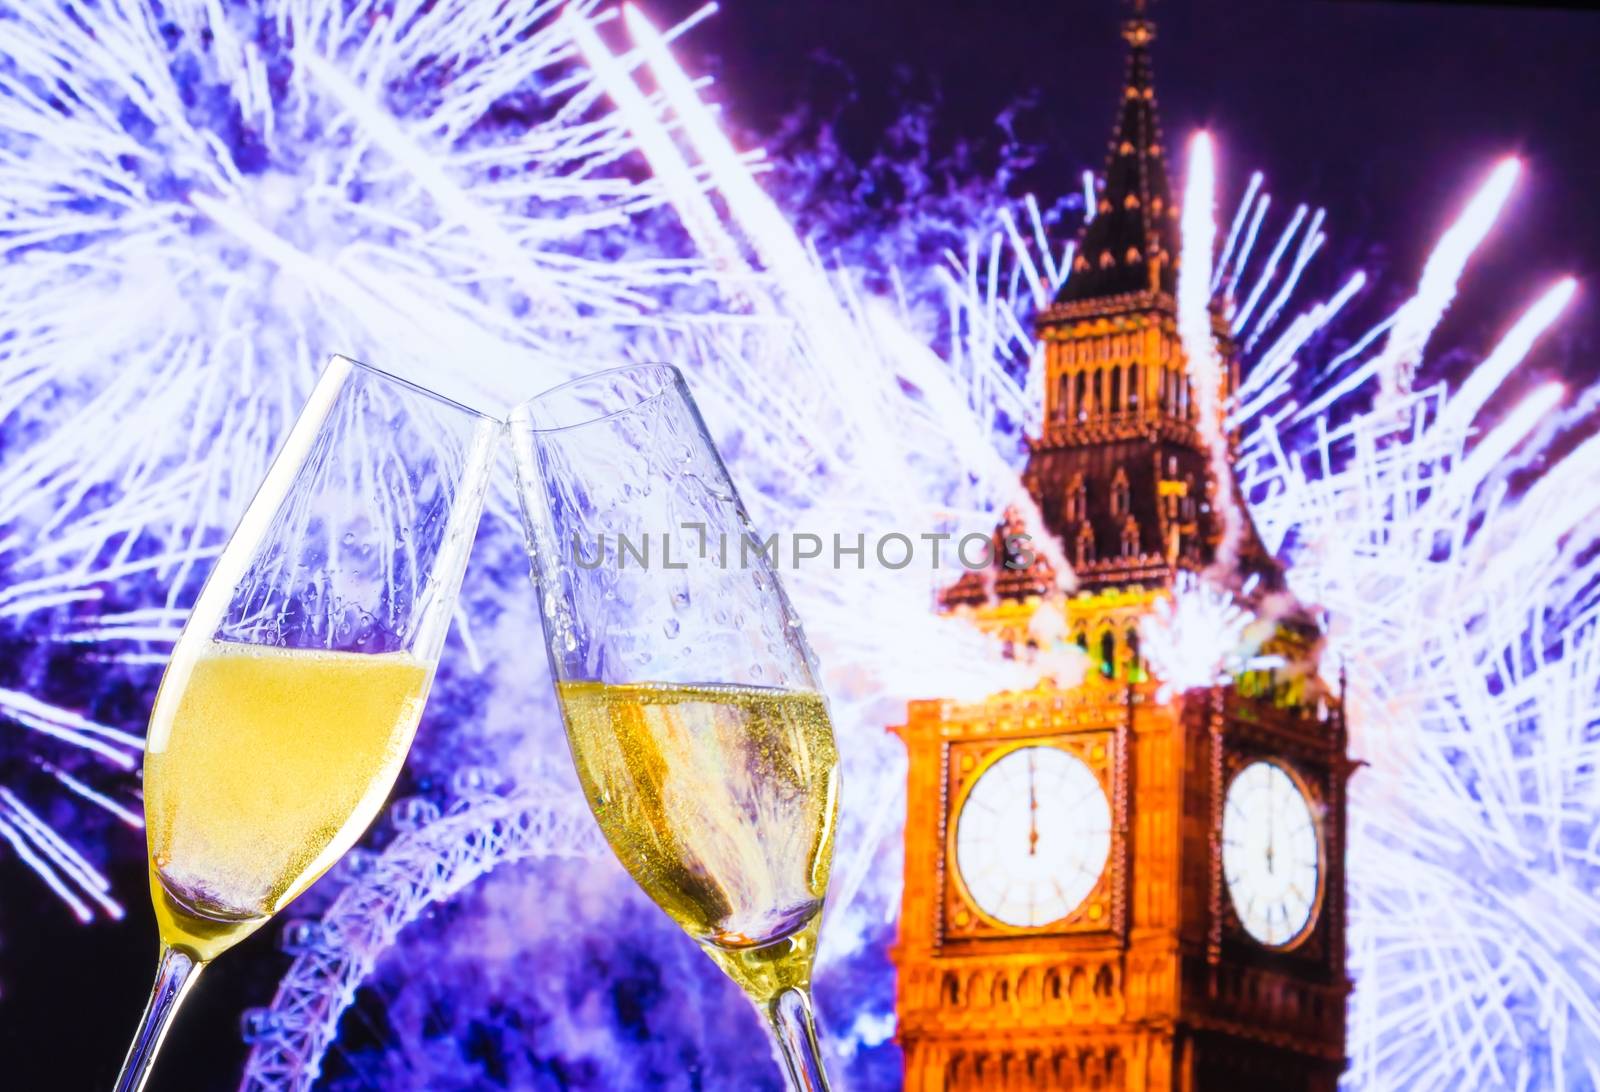 New Year or Christmas at midnight with champagne flutes make cheers on clock background by donfiore